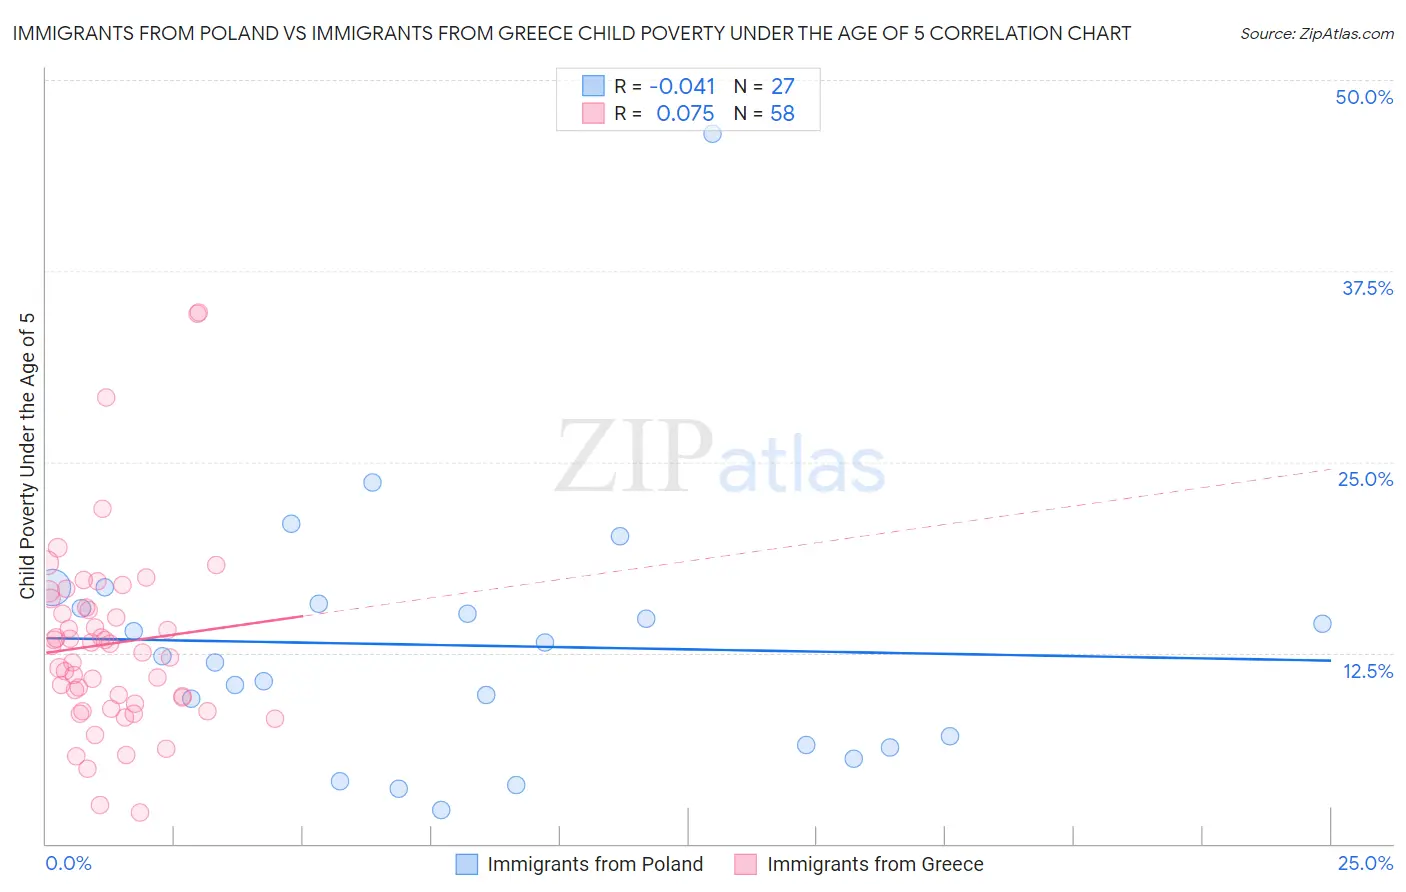 Immigrants from Poland vs Immigrants from Greece Child Poverty Under the Age of 5